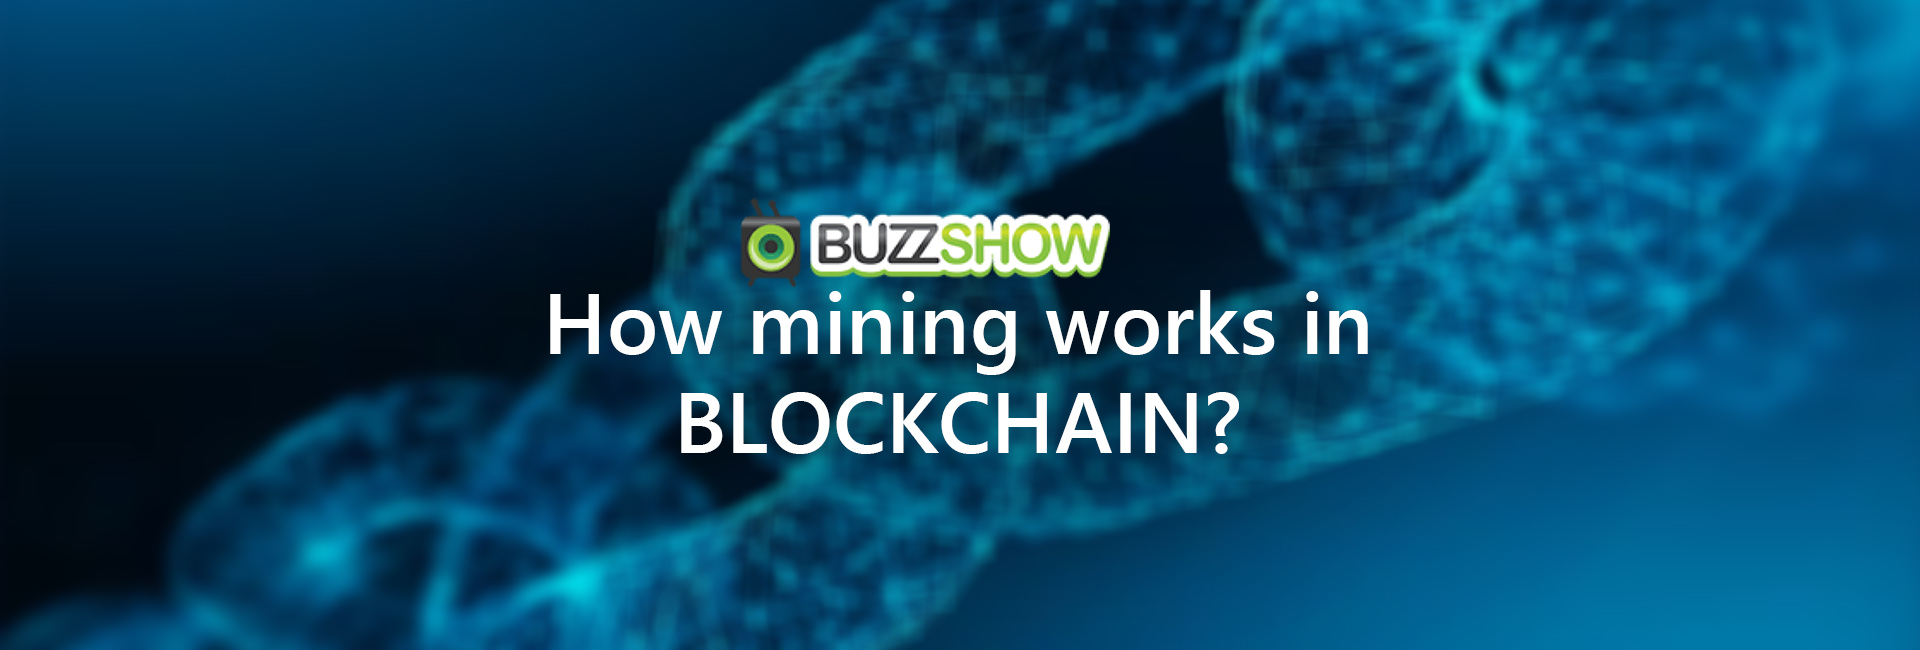 how mining works in blockchain?